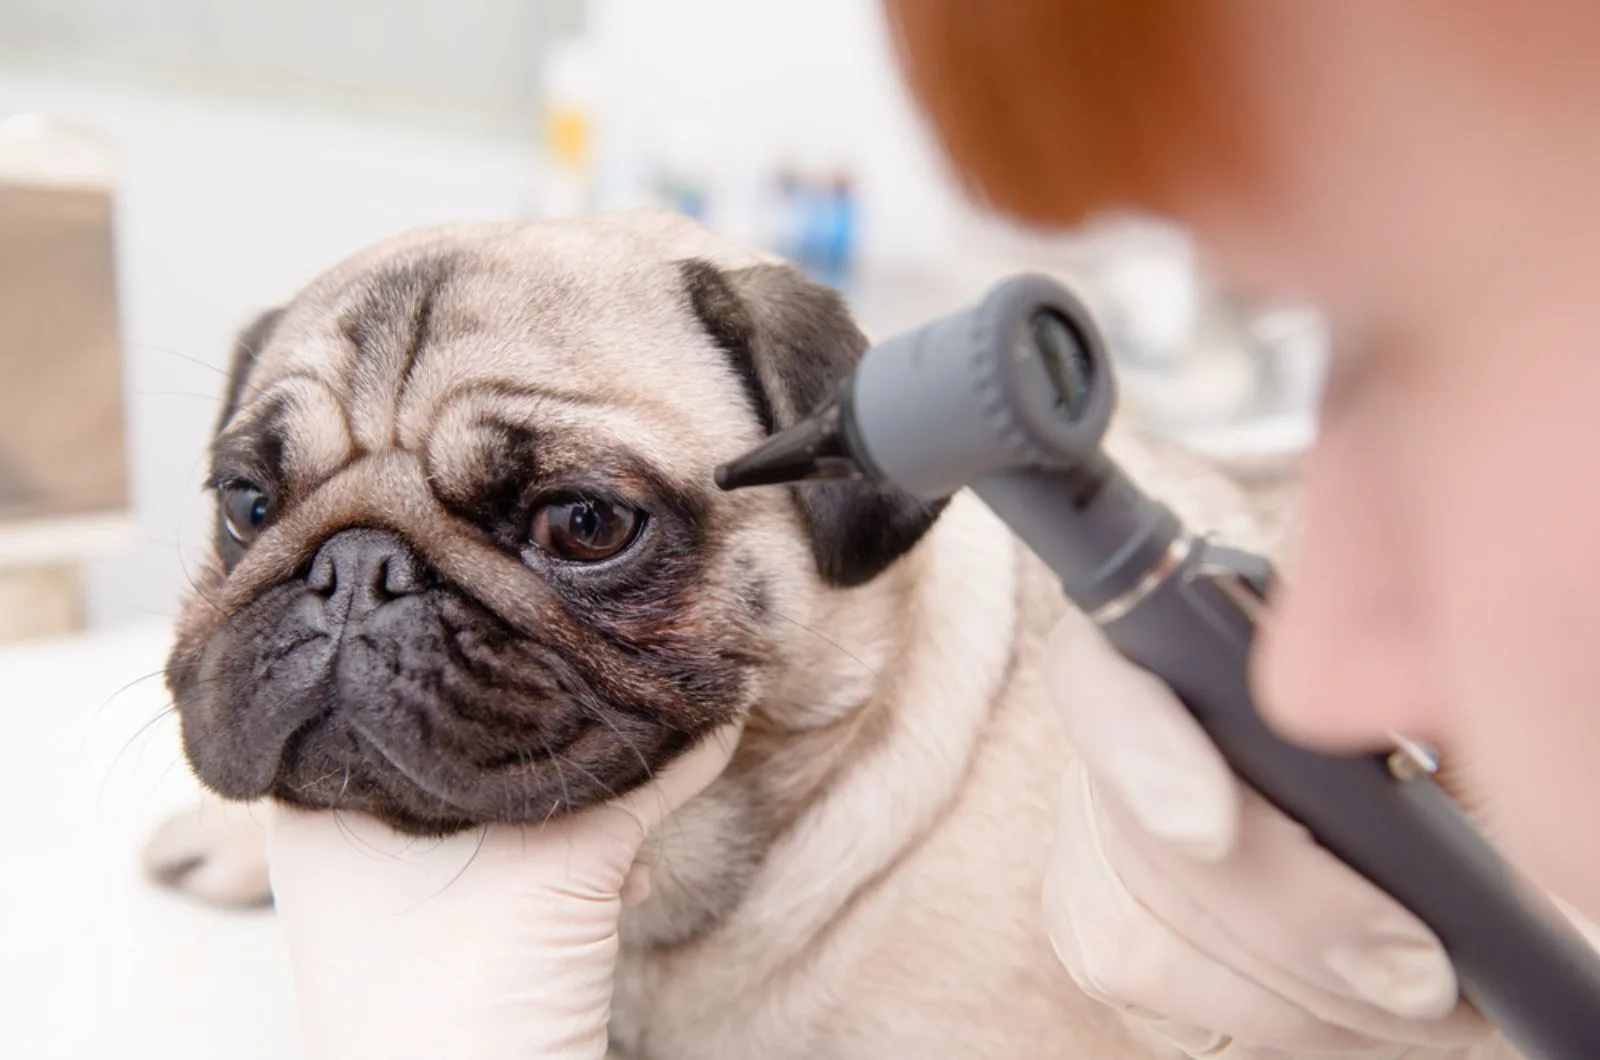 professional veterinary doctor examining the pug's eye  with an otoscope